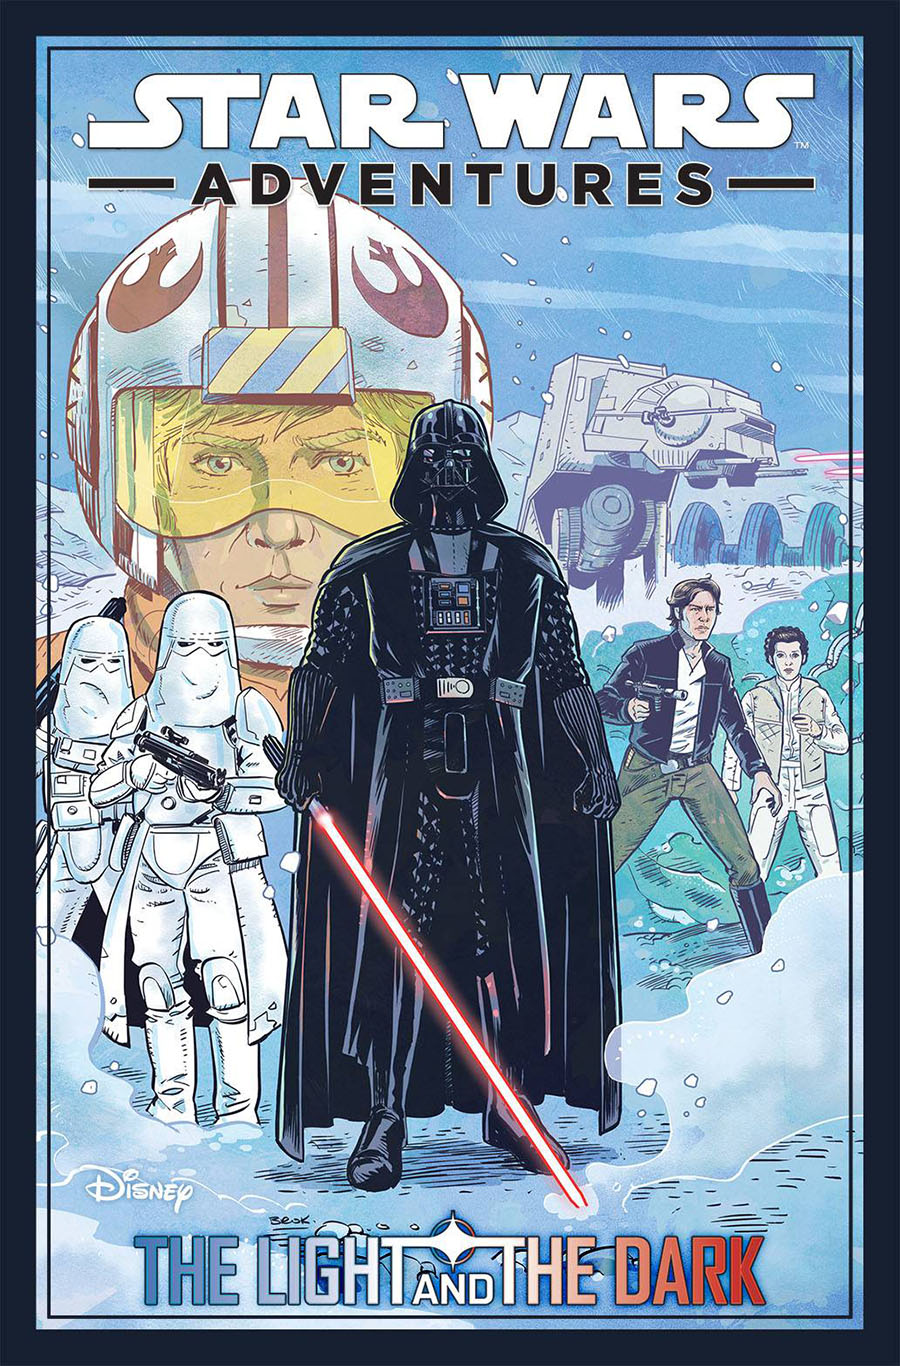 Star Wars Adventures (2020) Vol 1 The Light And The Dark TP